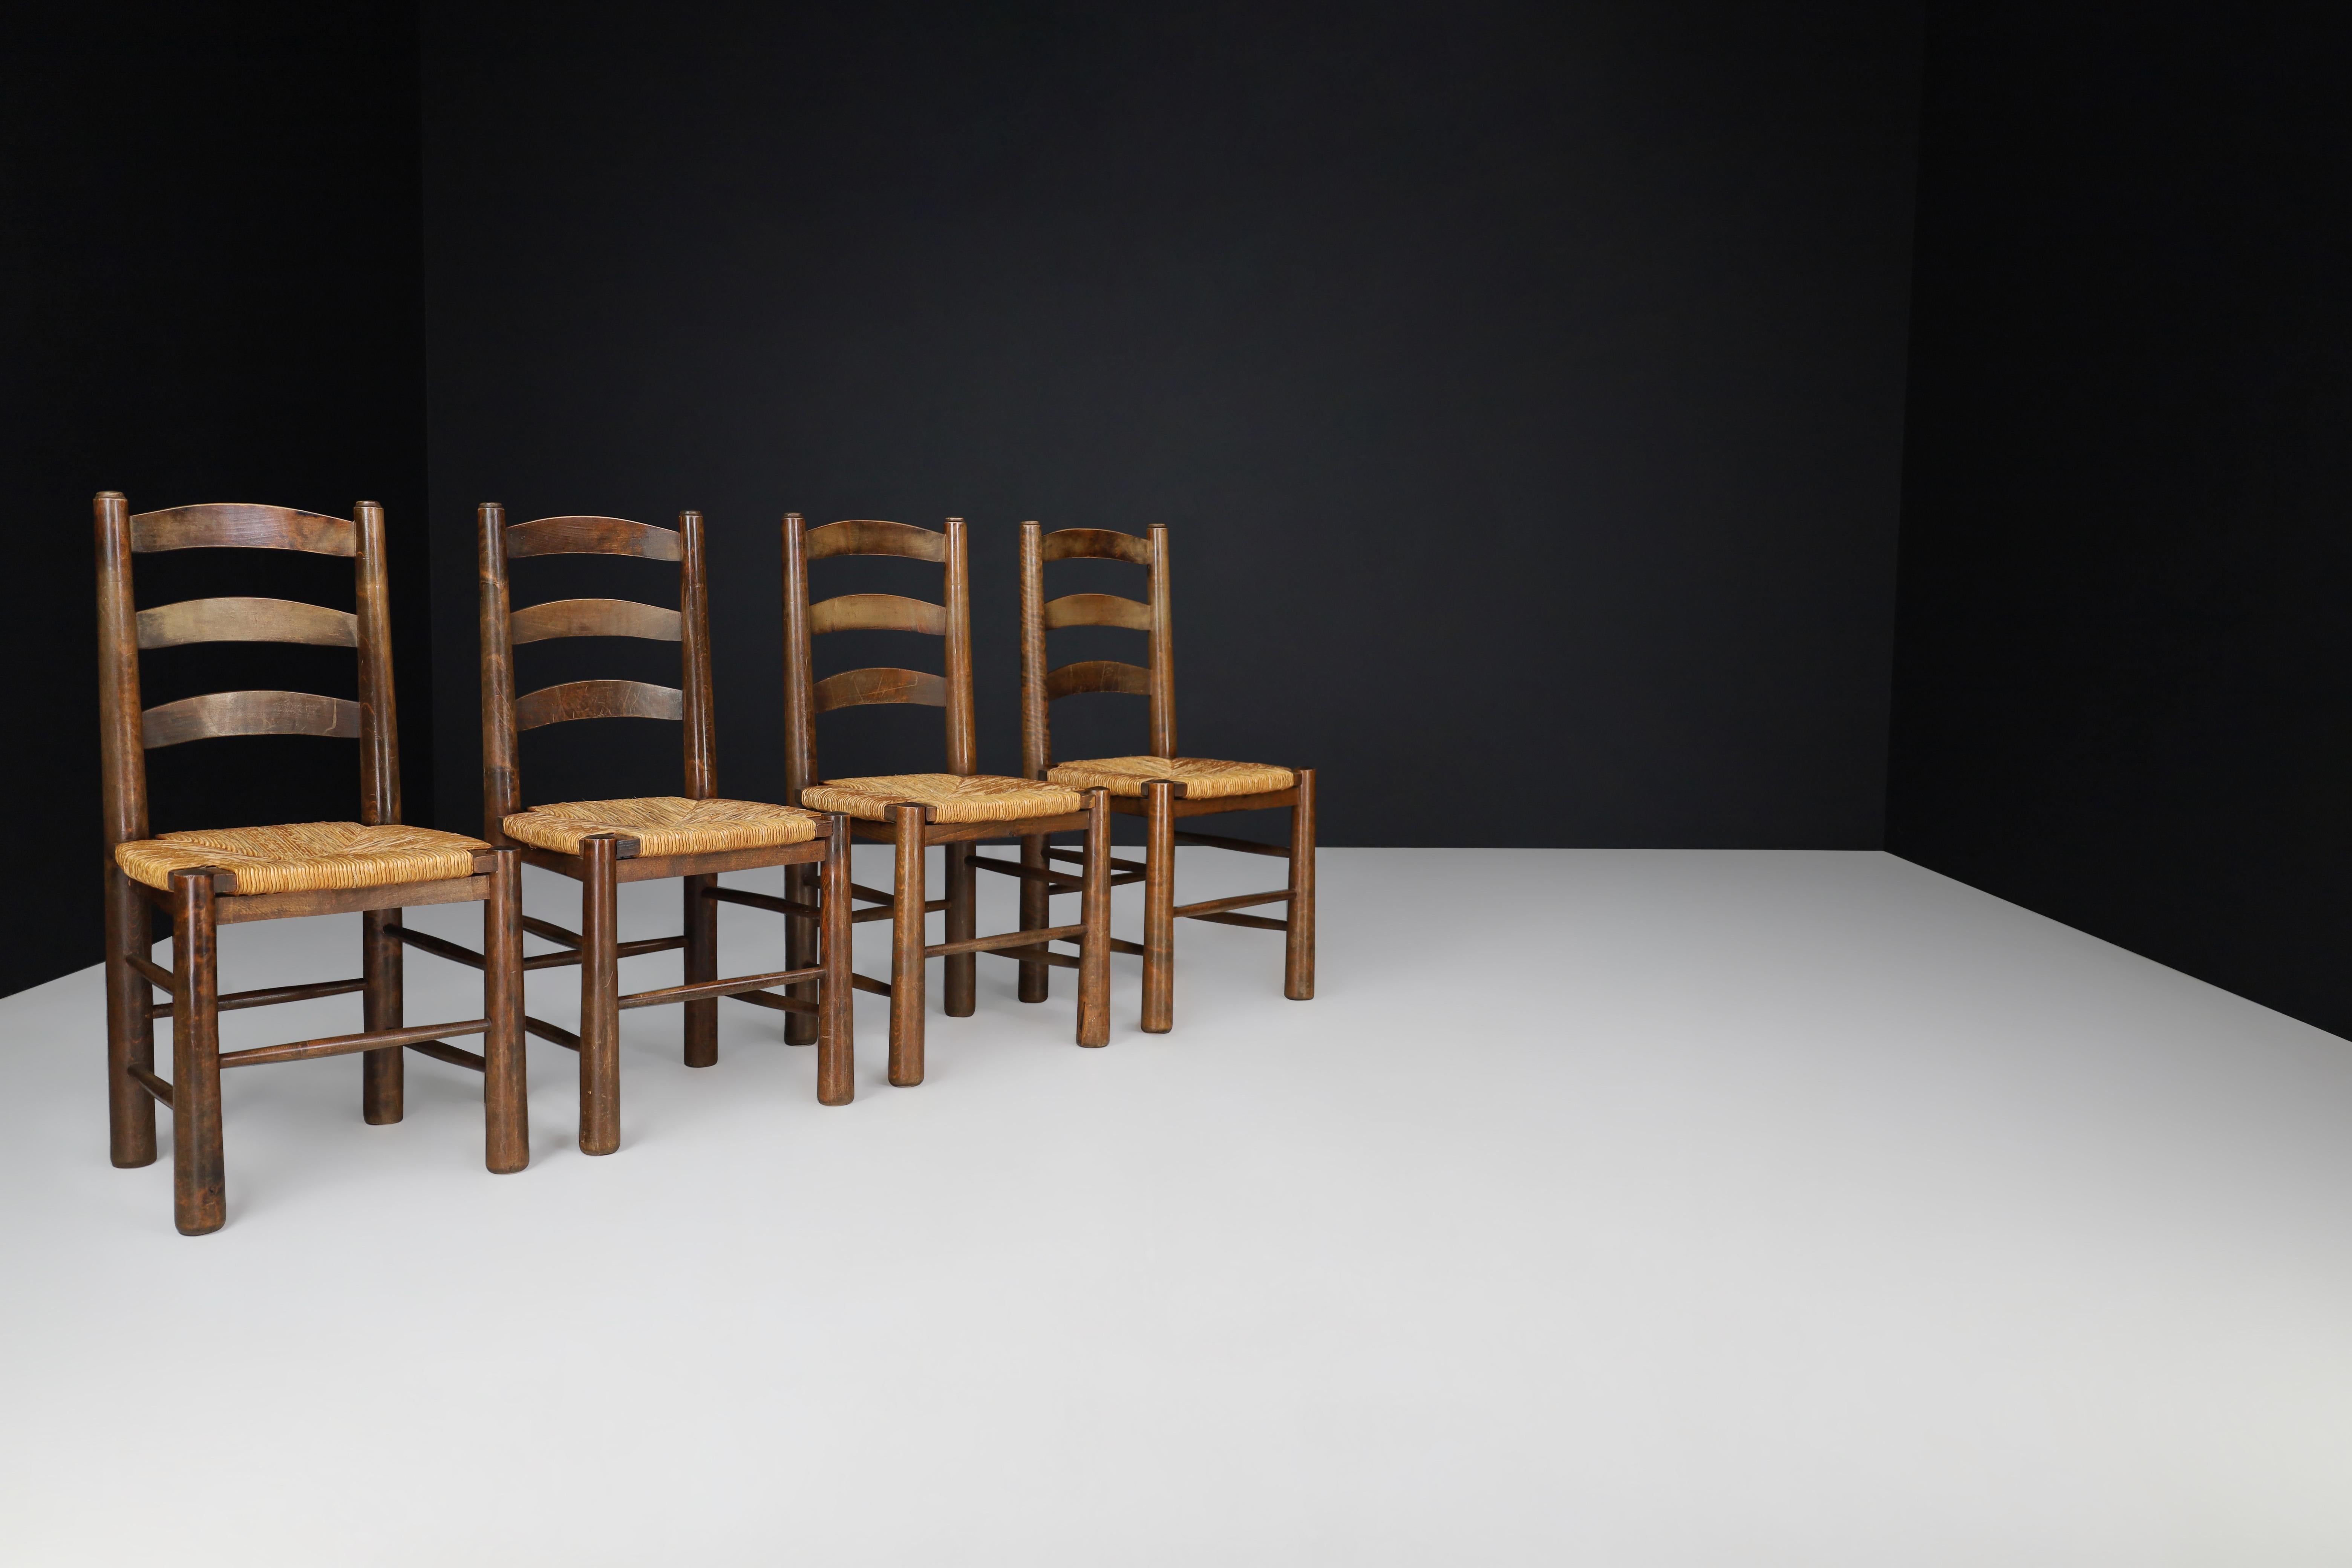 Georges Robert Chalet Chairs in Oak and Rush, France, 1950s For Sale 4